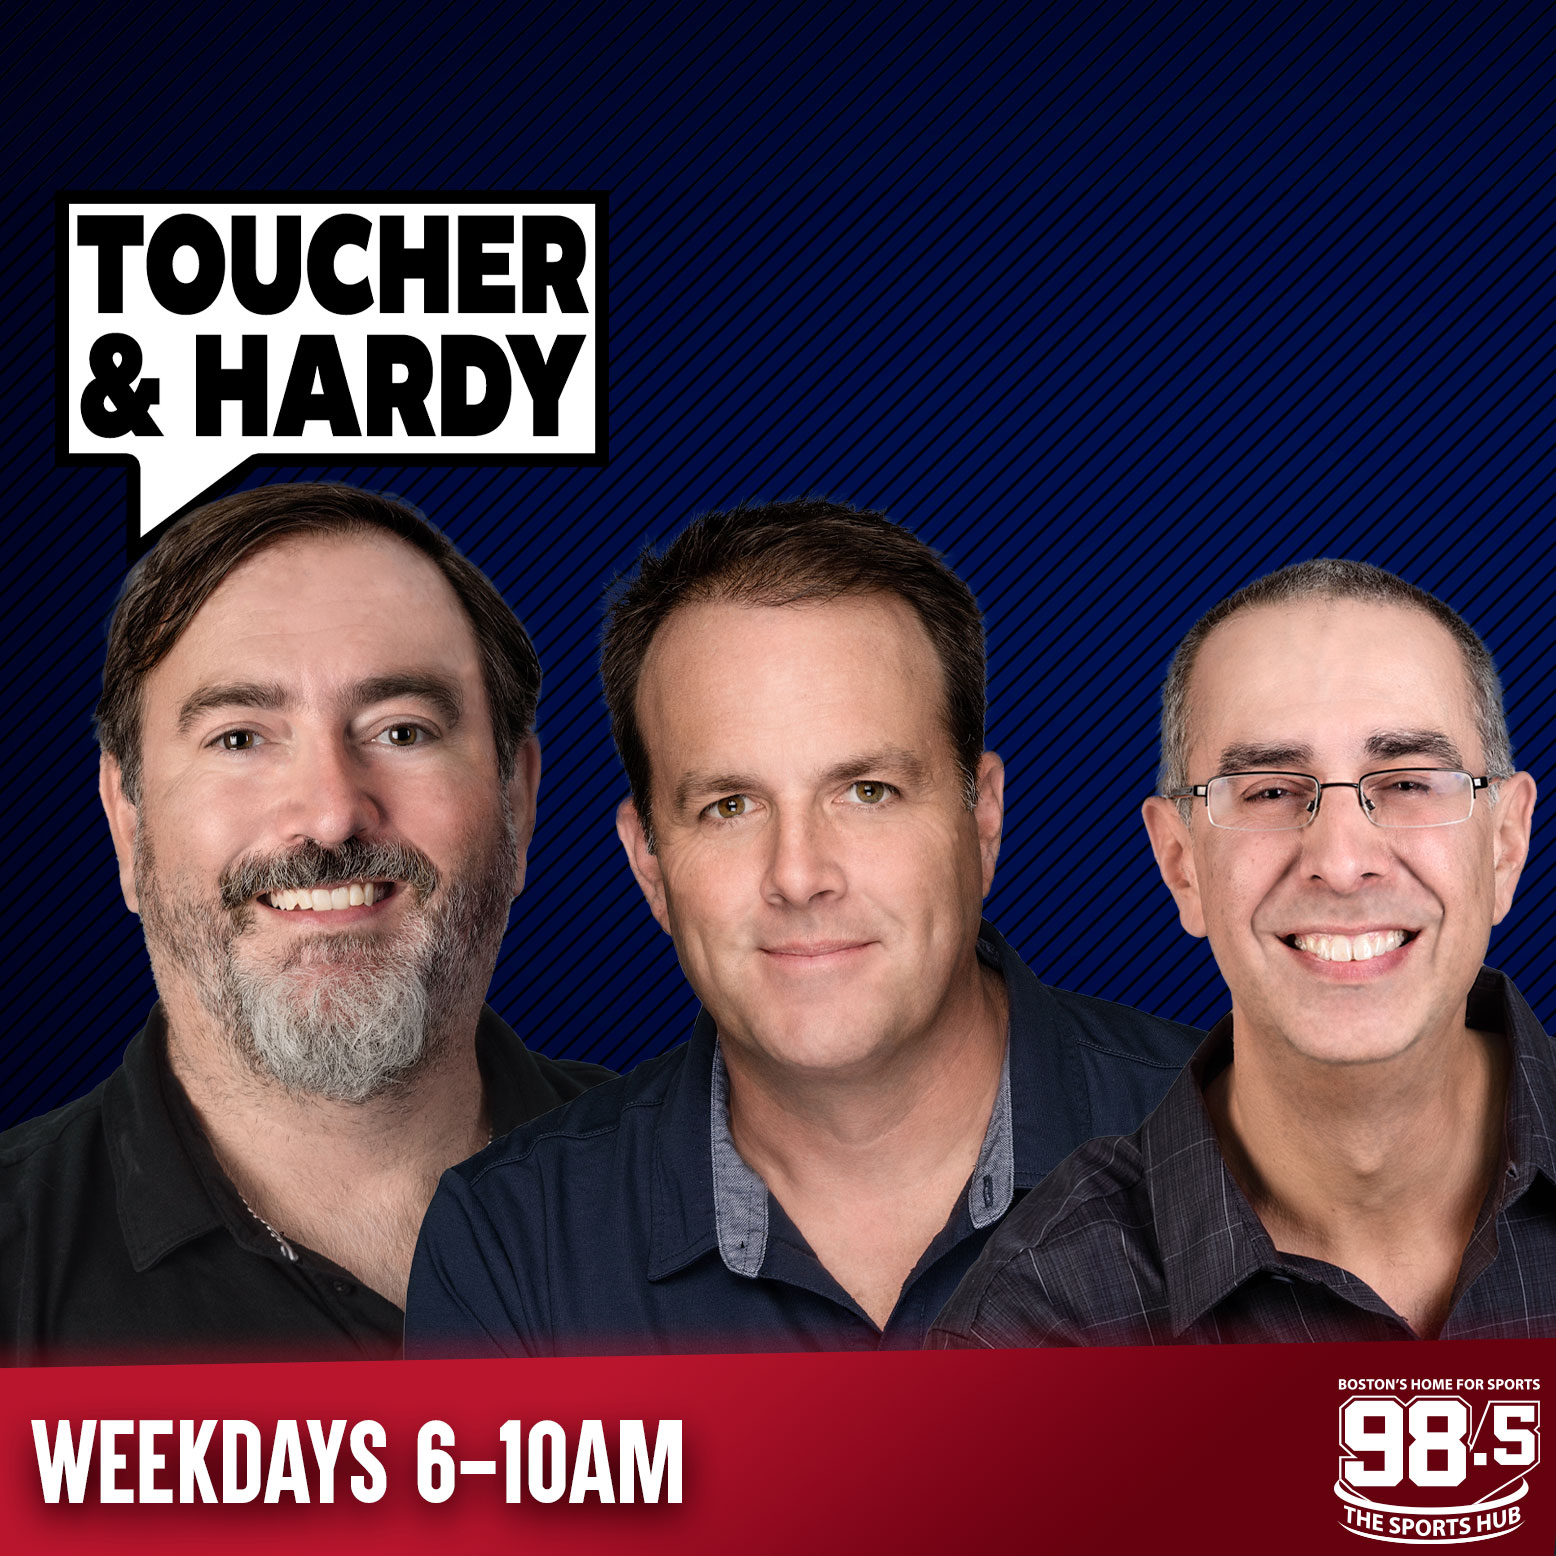 Billy Jaffe In-Studio // Nick Foligno Joins Toucher & Rich // The Stack - 3/30 (Hour 4)